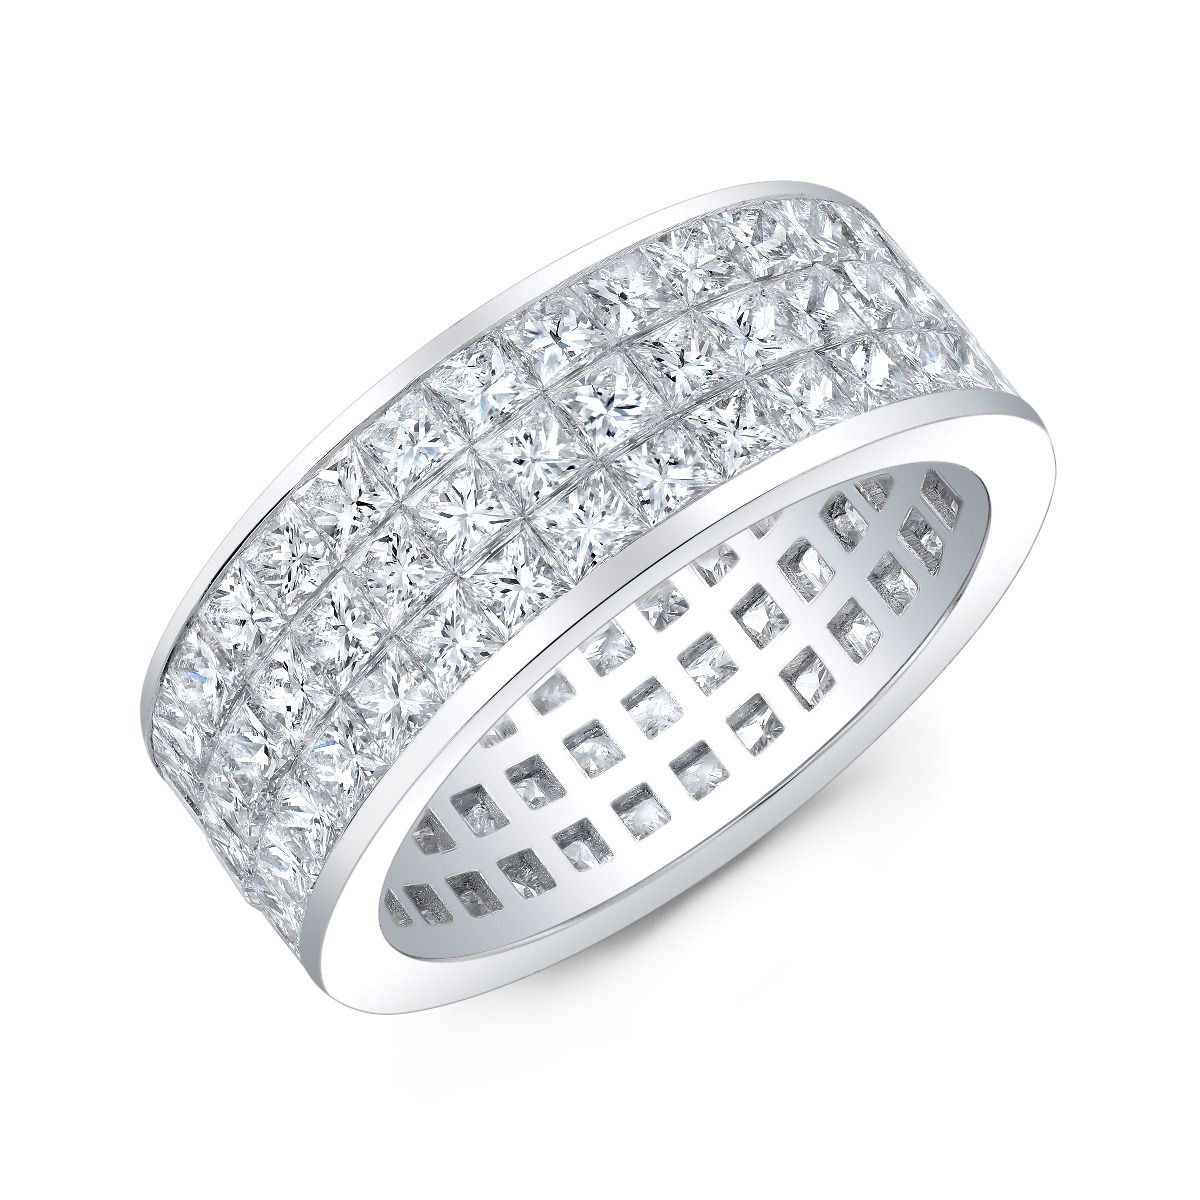 This 6 Carat Invisible Set Eternity Men's Band is a MUST HAVE. Elegant and gleaming with 3 Rows of Pave Set of Diamonds that goes along all the around the band making it for a splendid finish.